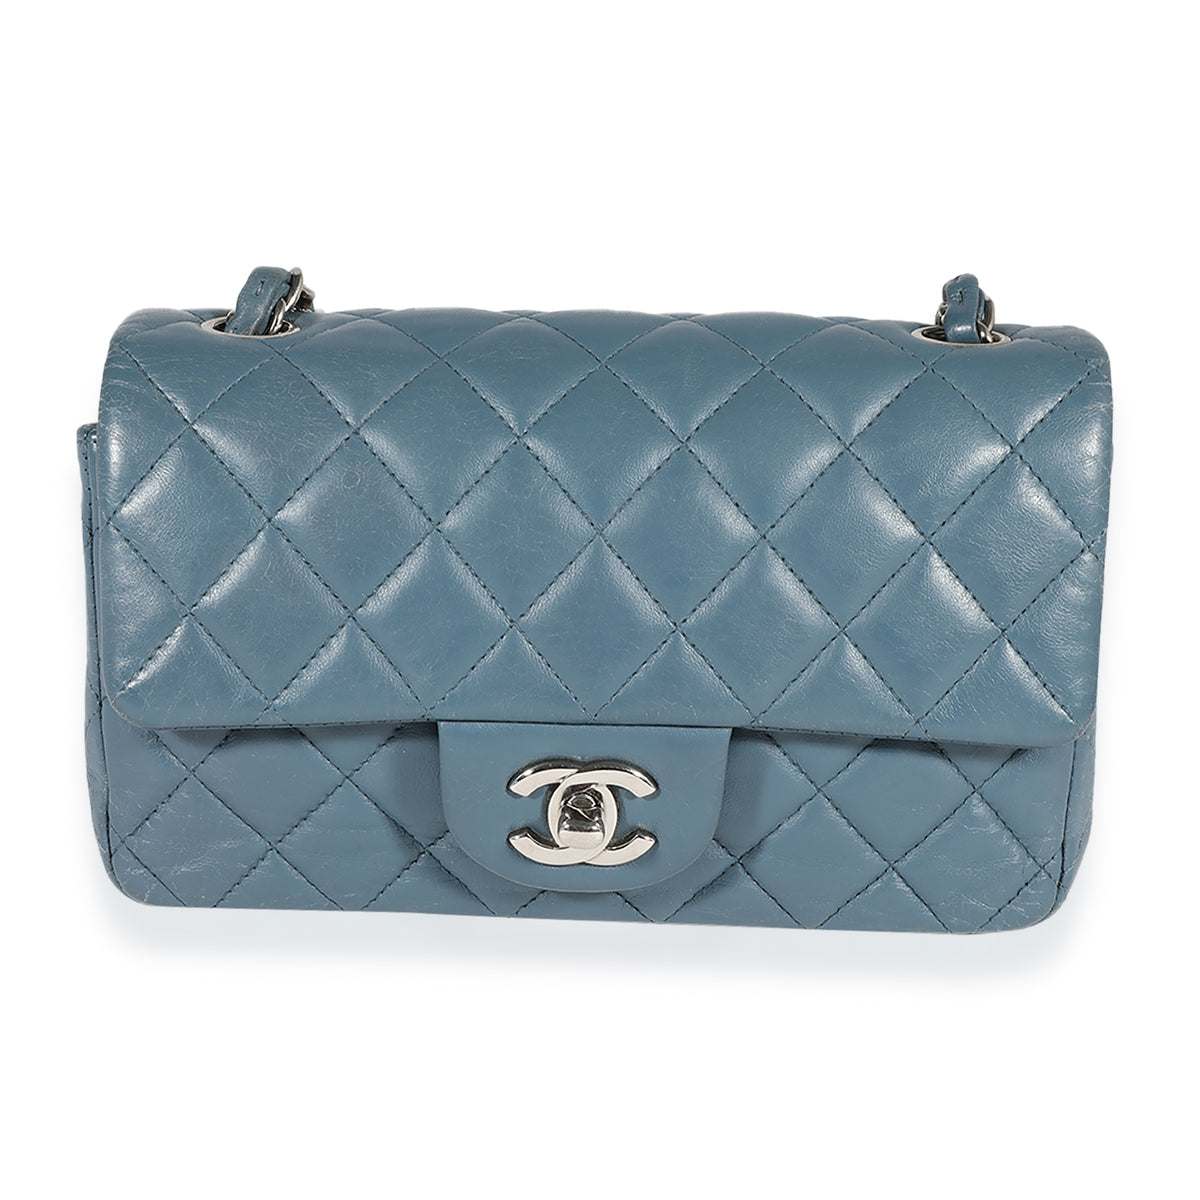 BAG of the Day 3: CHANEL MINI Rectangle Classic Flap patent Blue